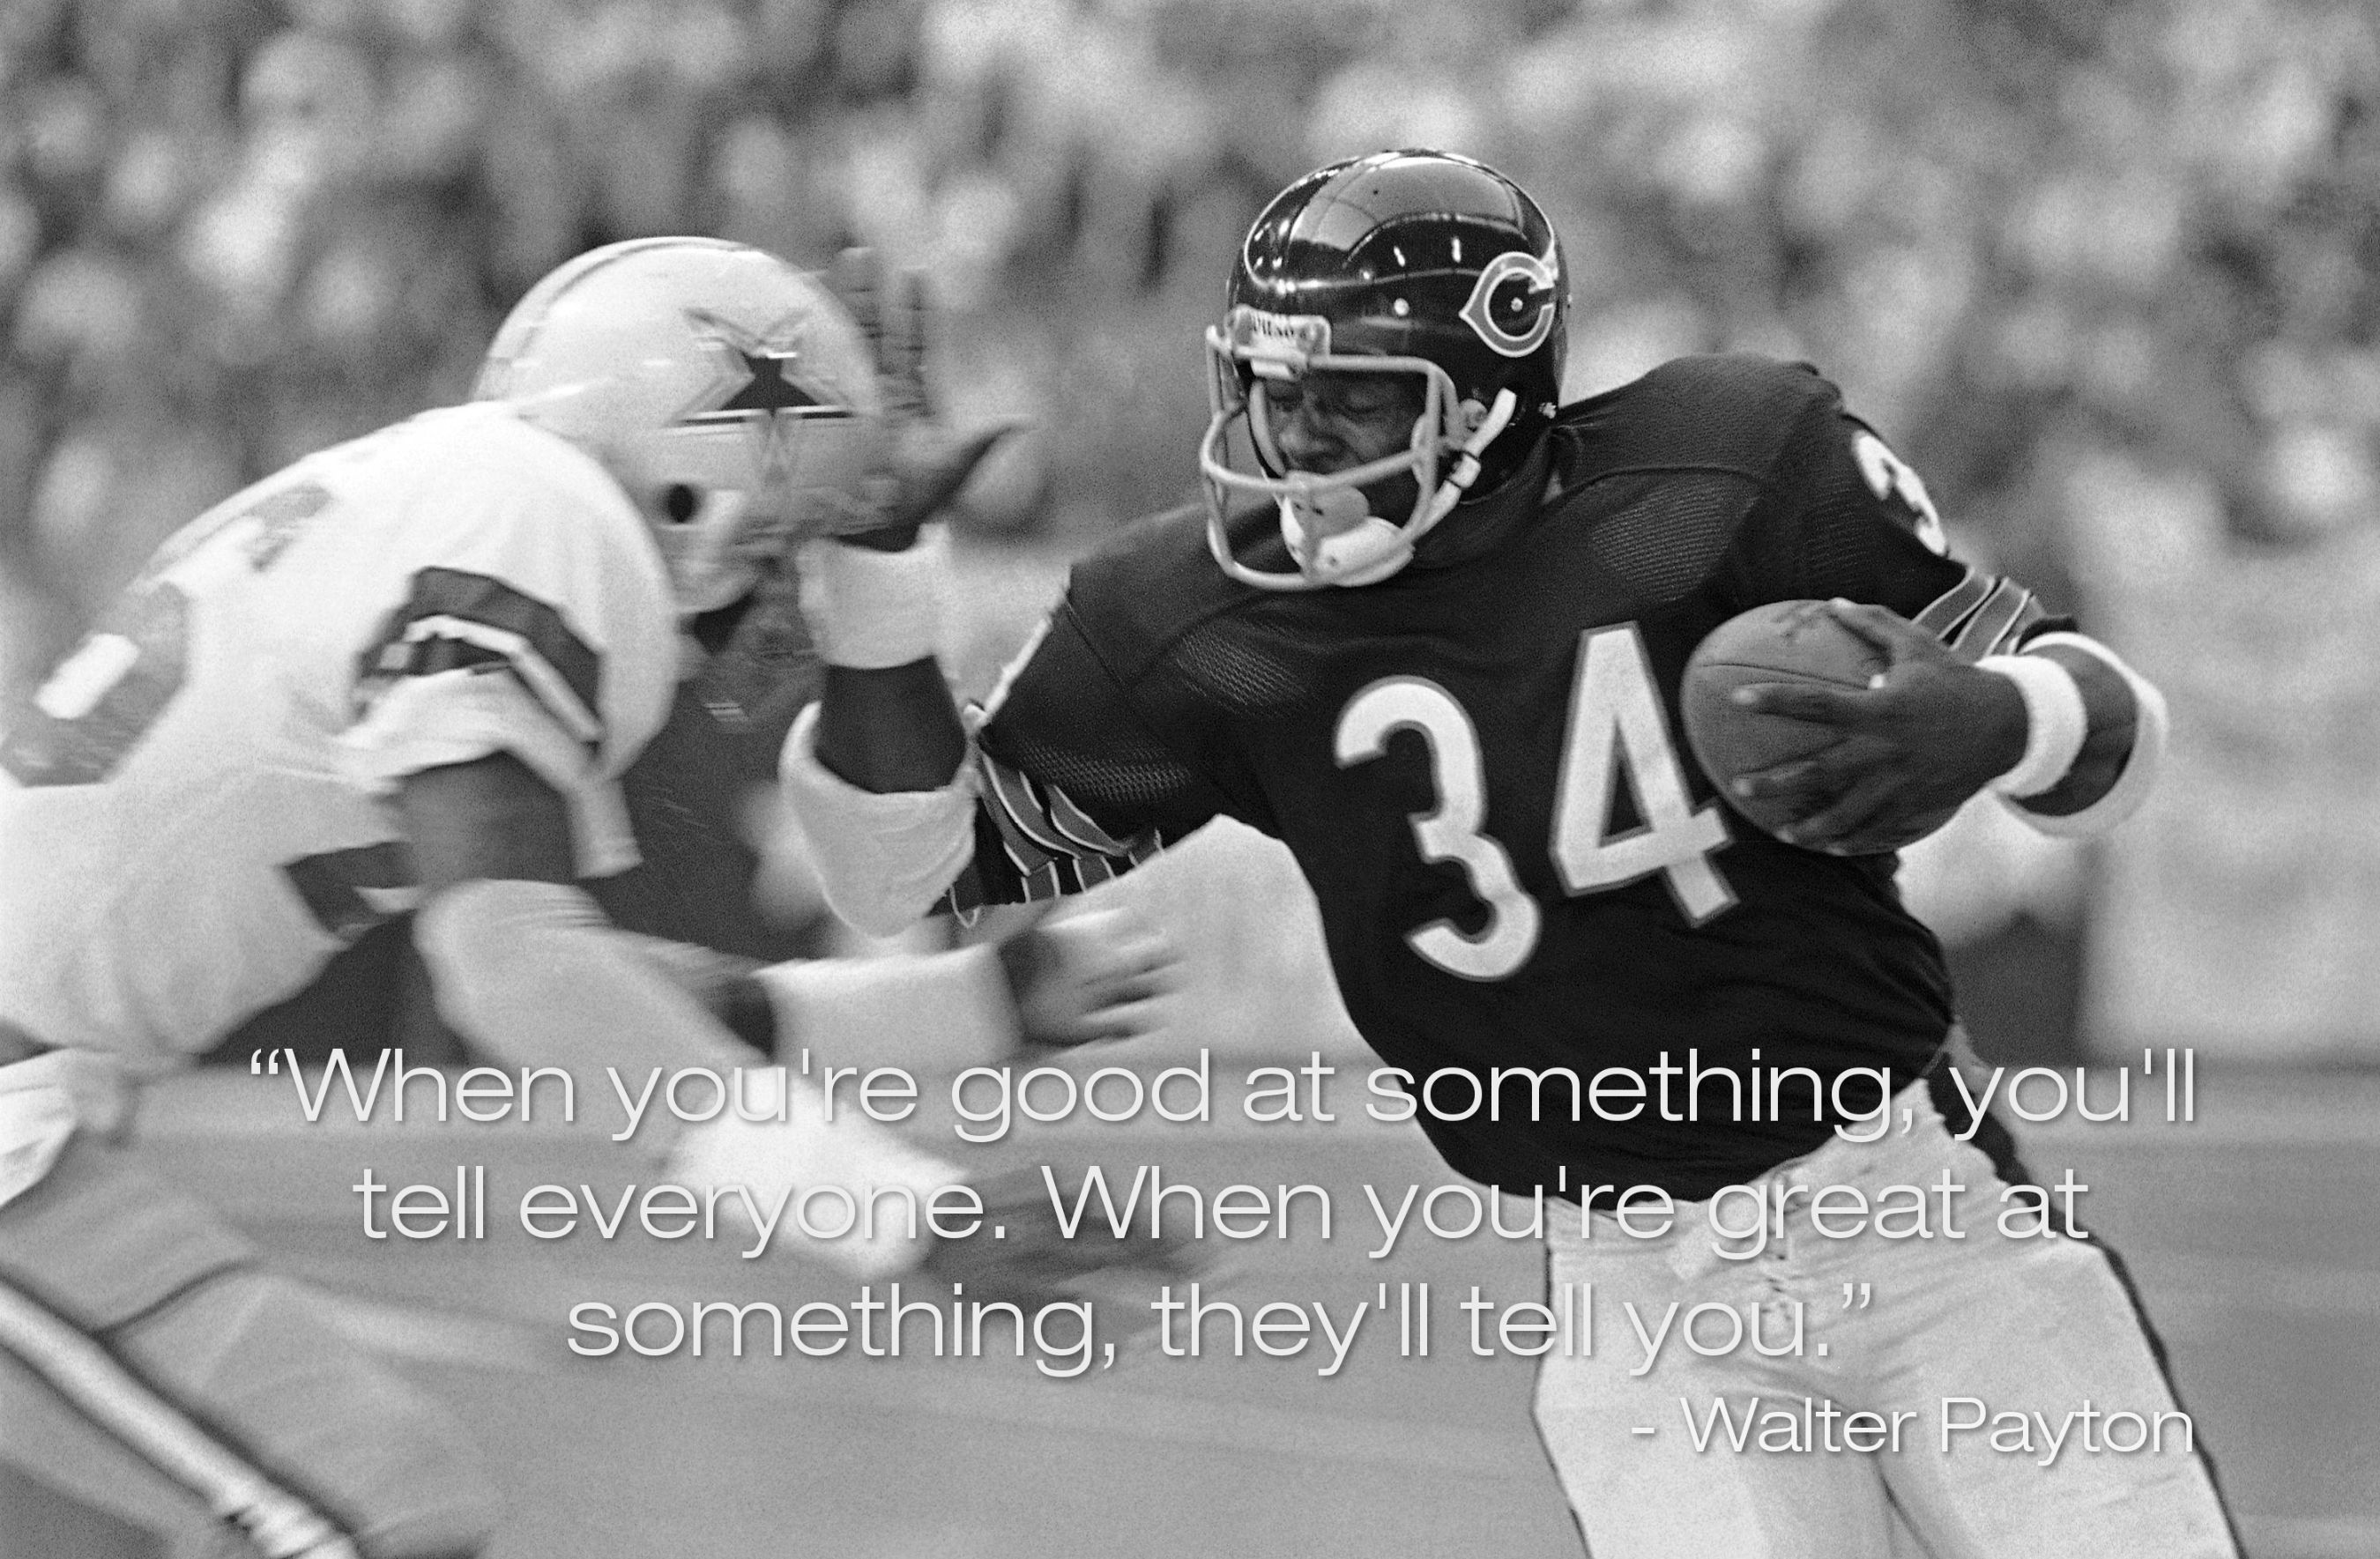 Walter Payton Quotes - Walter Payton Quote When You Re Good , HD Wallpaper & Backgrounds